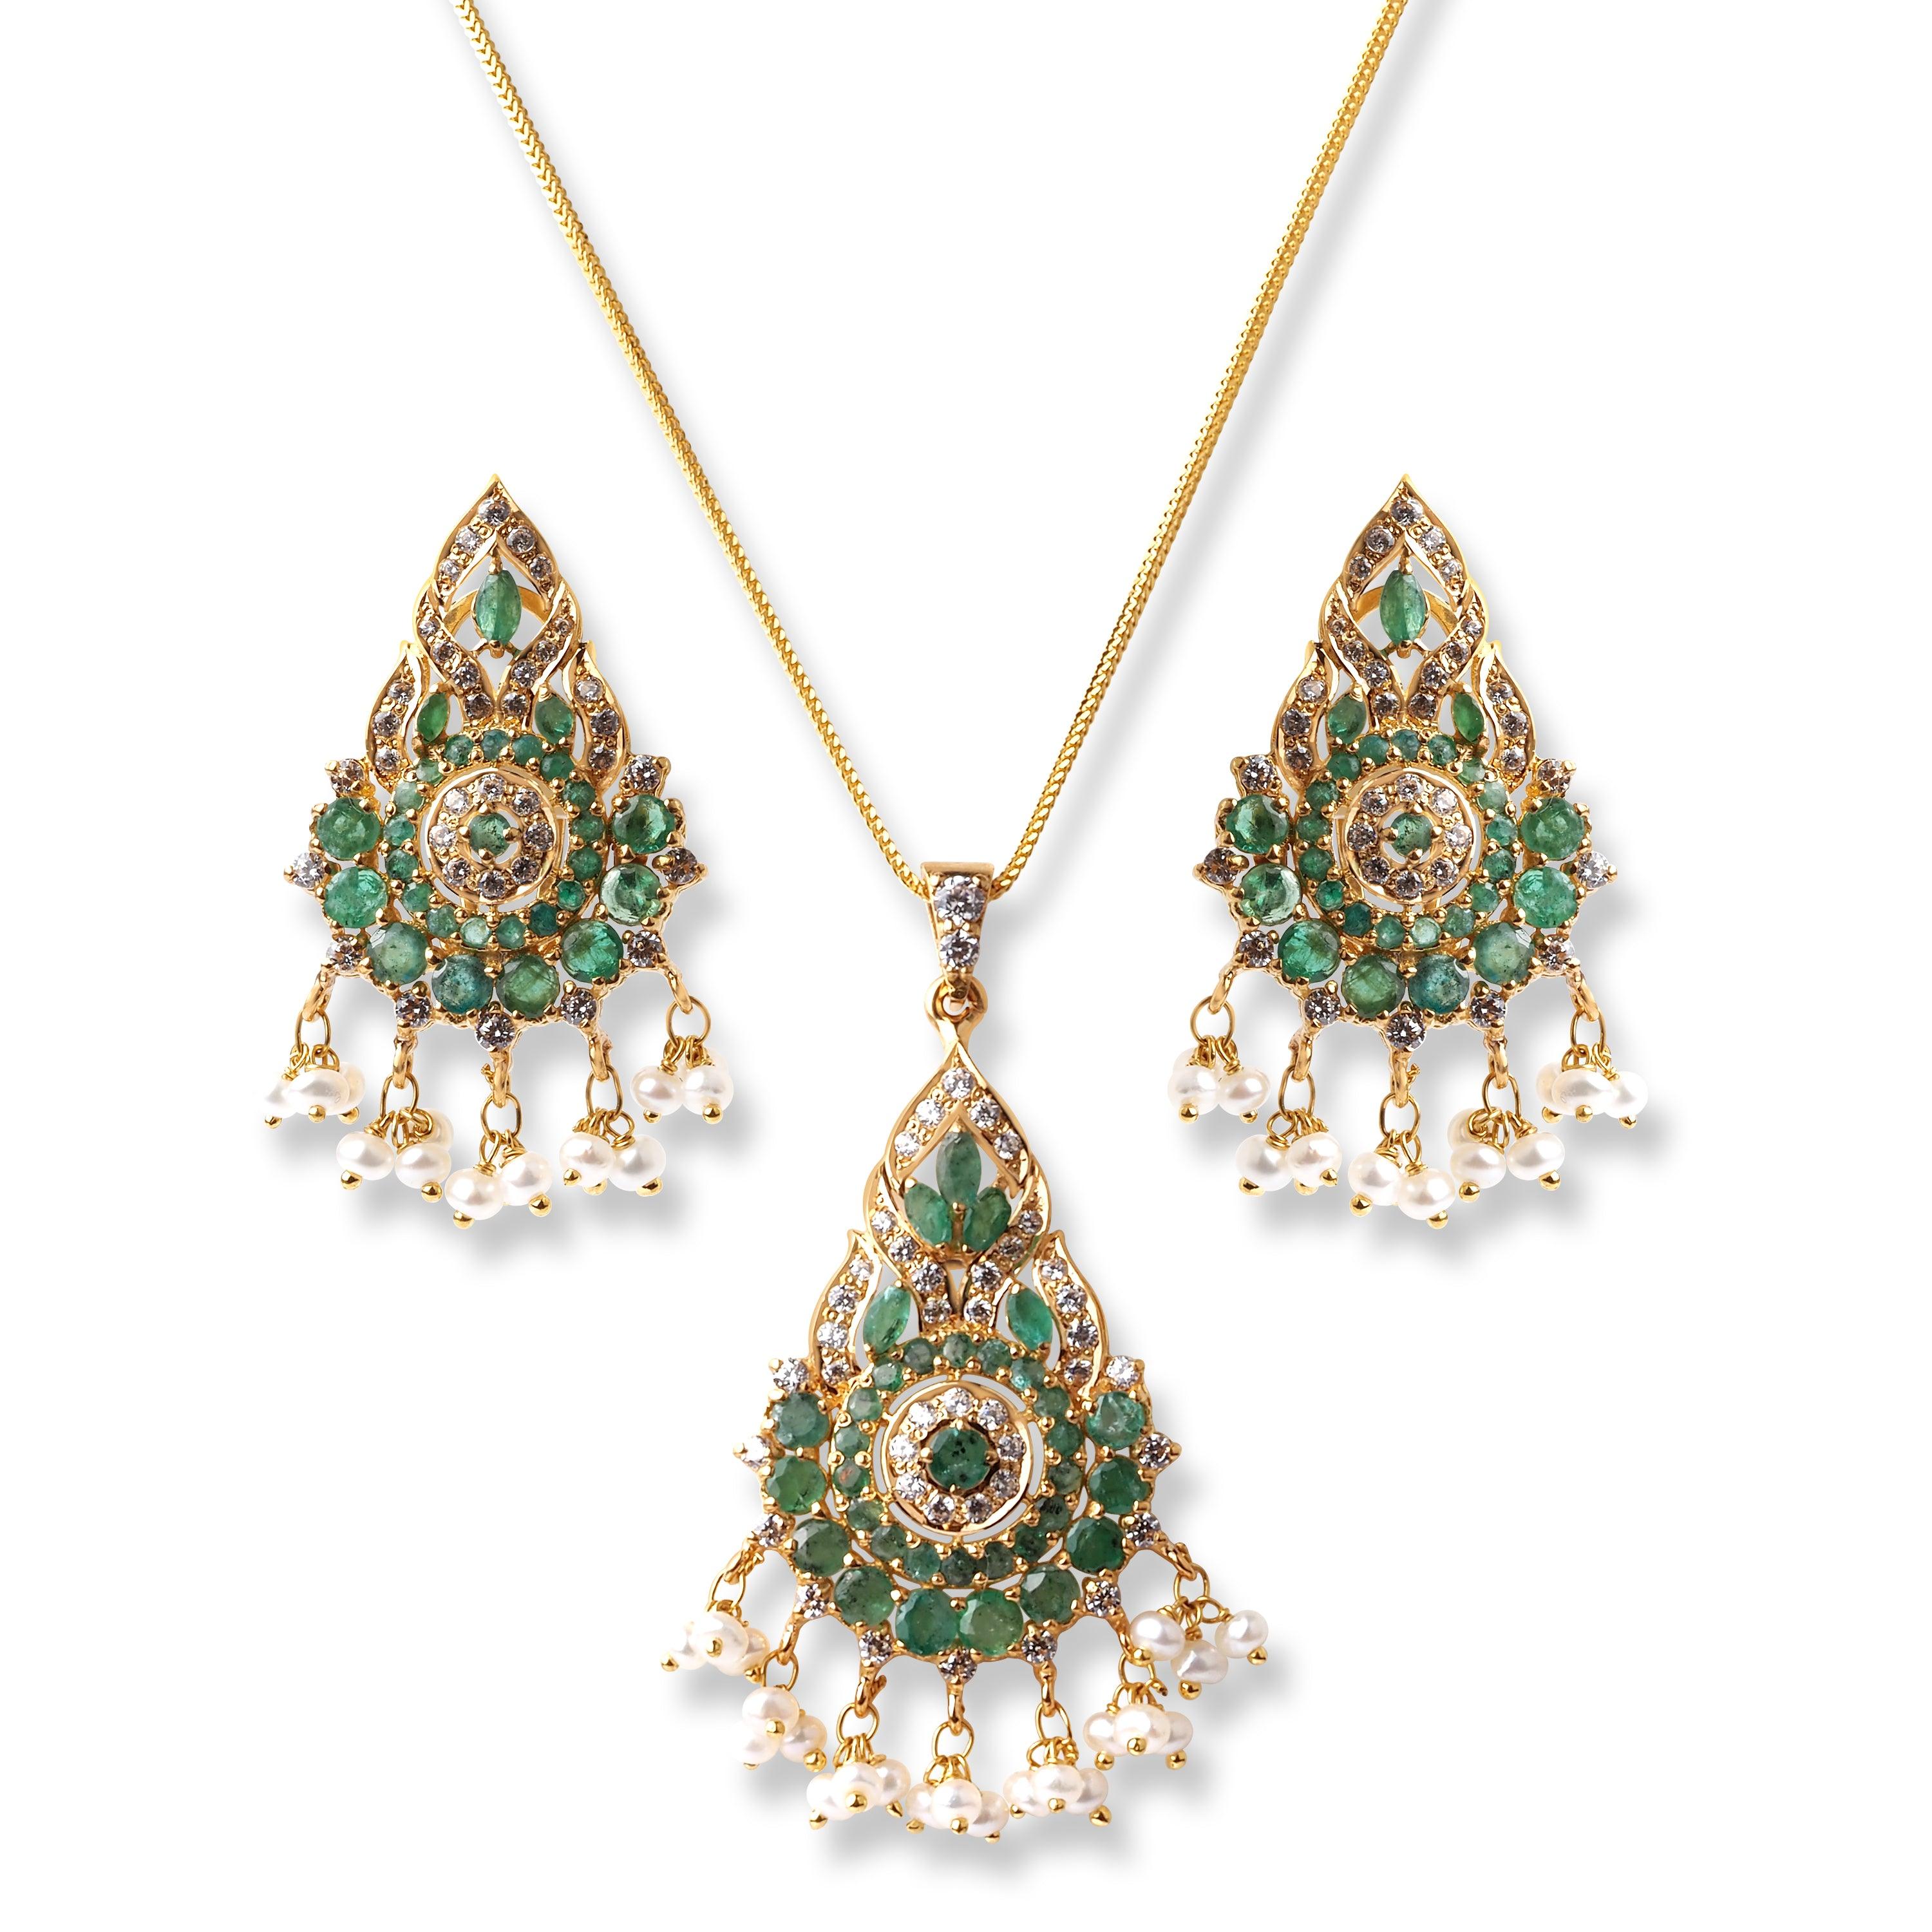 22ct Gold Set with Green Cubic Zirconia Stones & Cultured Pearls (Pendant + Chain + Earrings) (19.8g) - Minar Jewellers